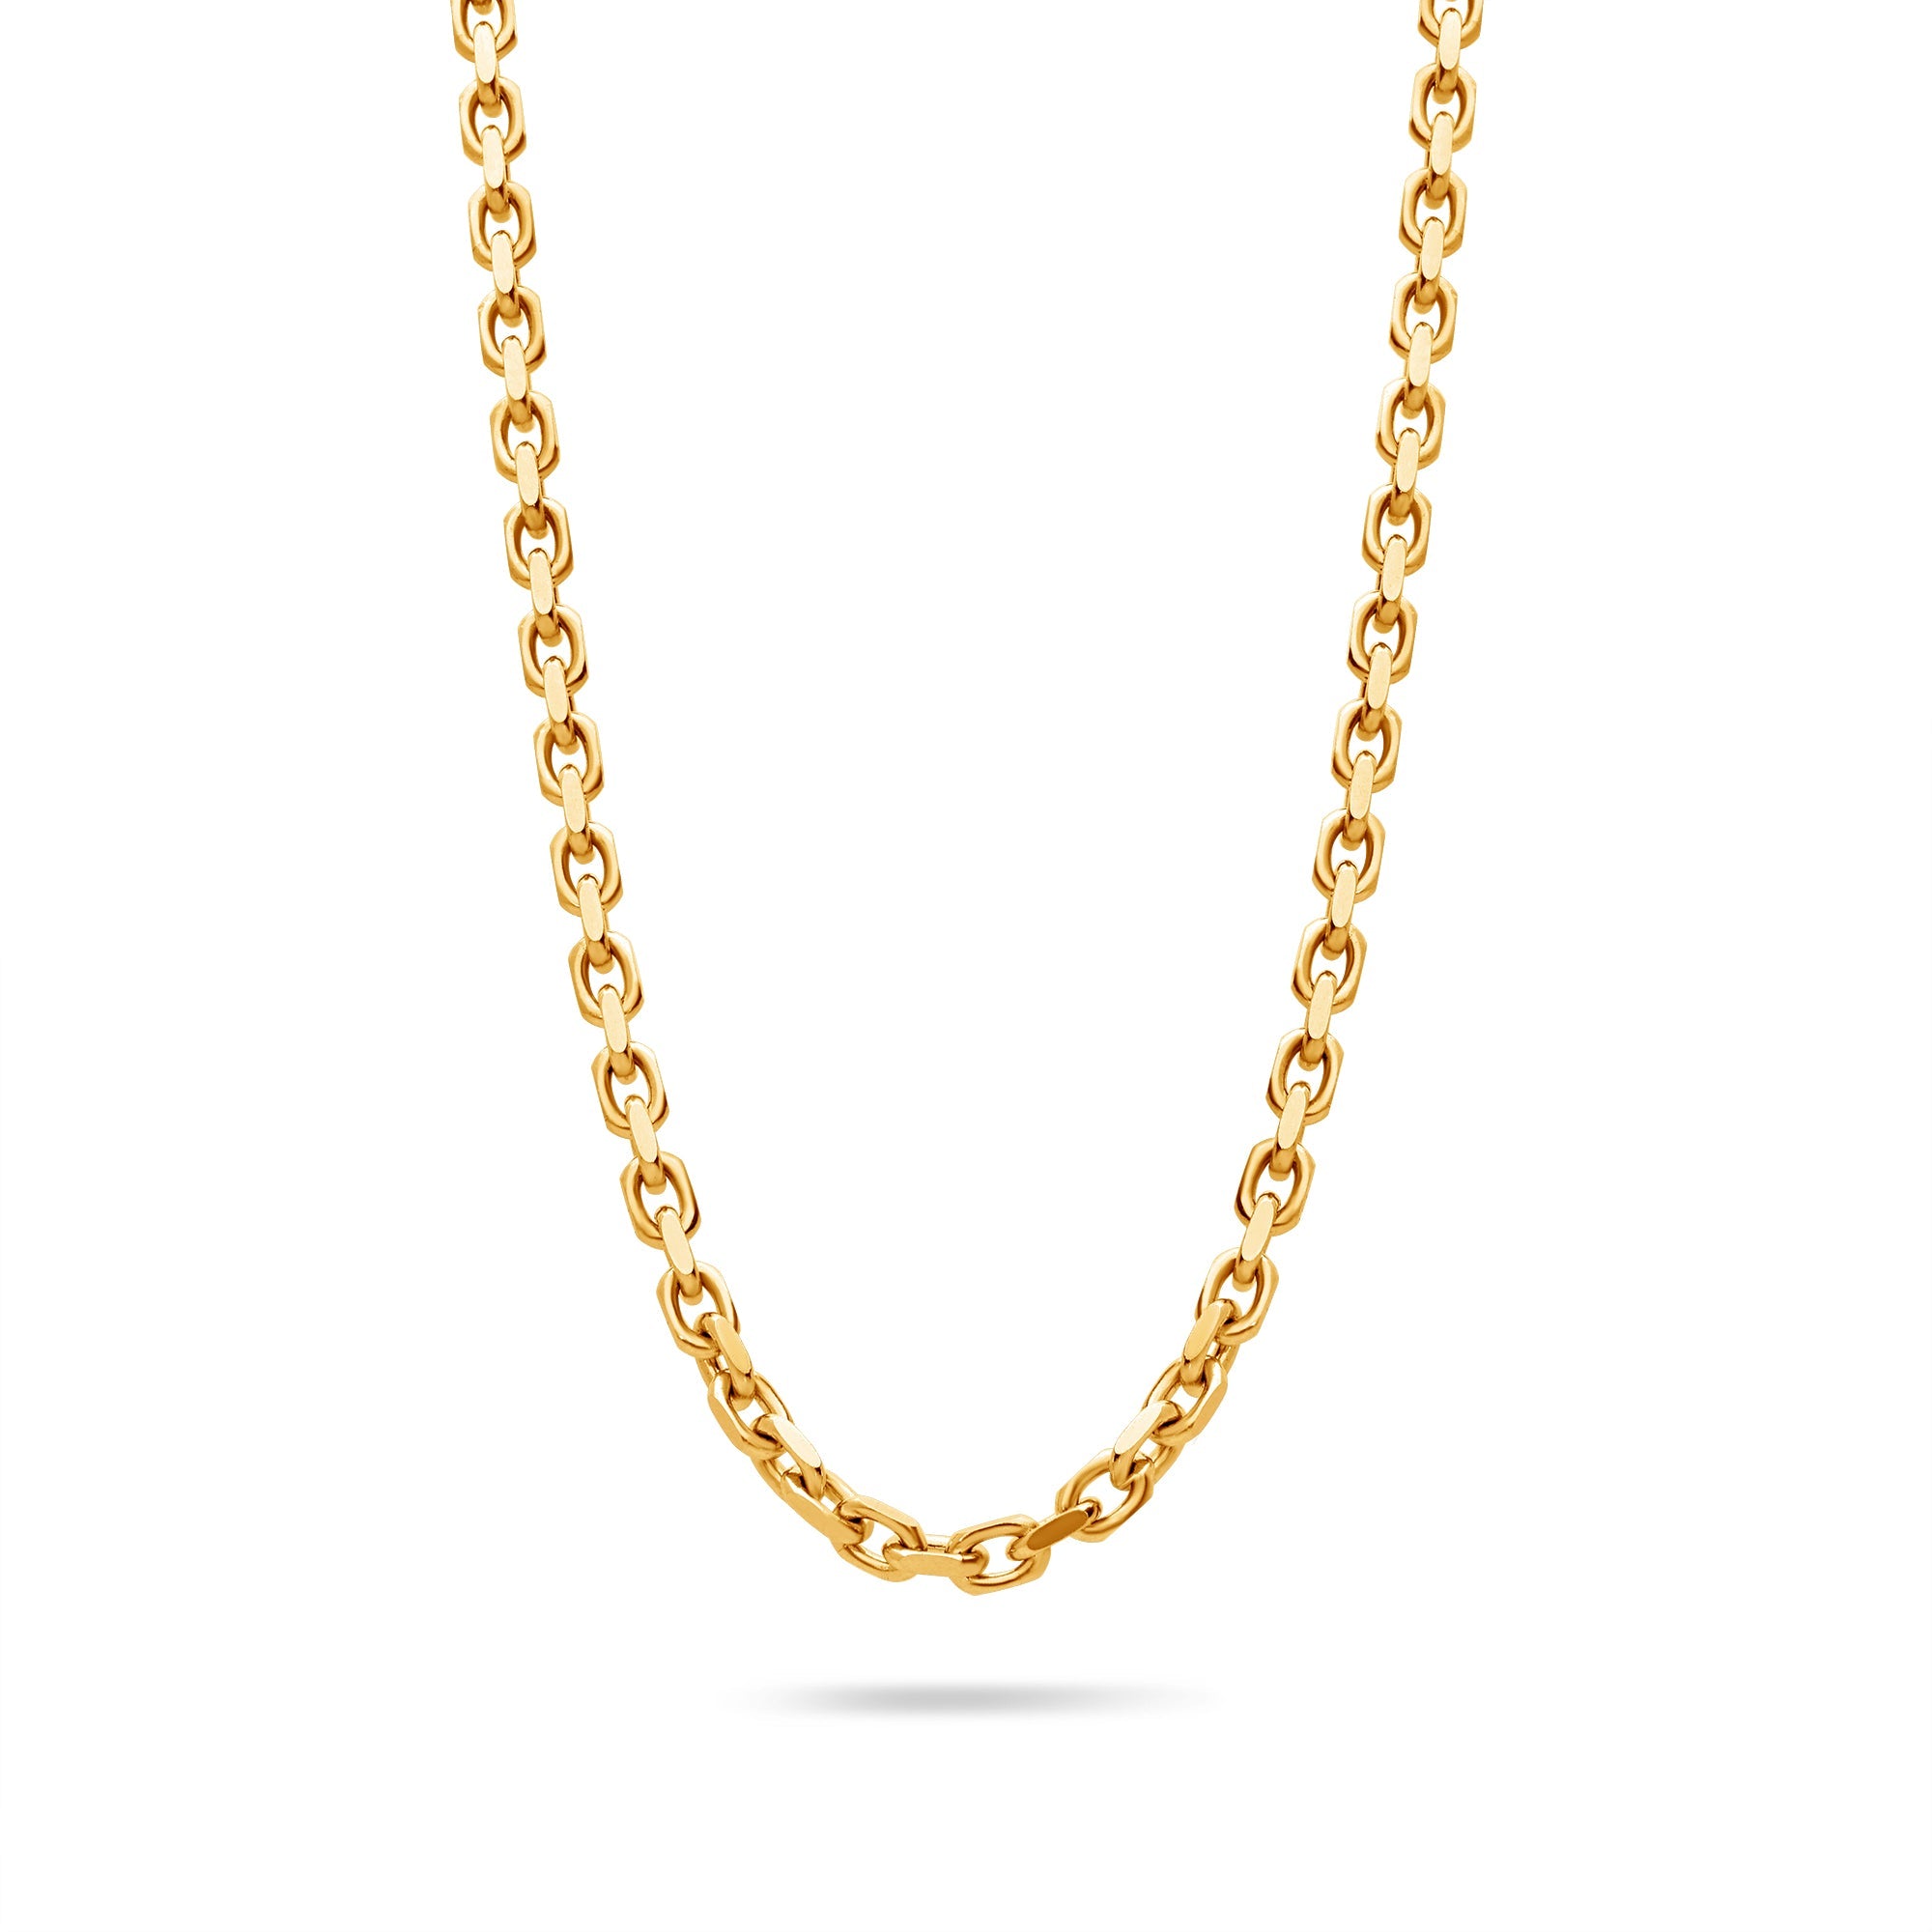 Gold Odin Link Chain (4mm) (14K YELLOW GOLD) - IF & Co. Custom Jewelers